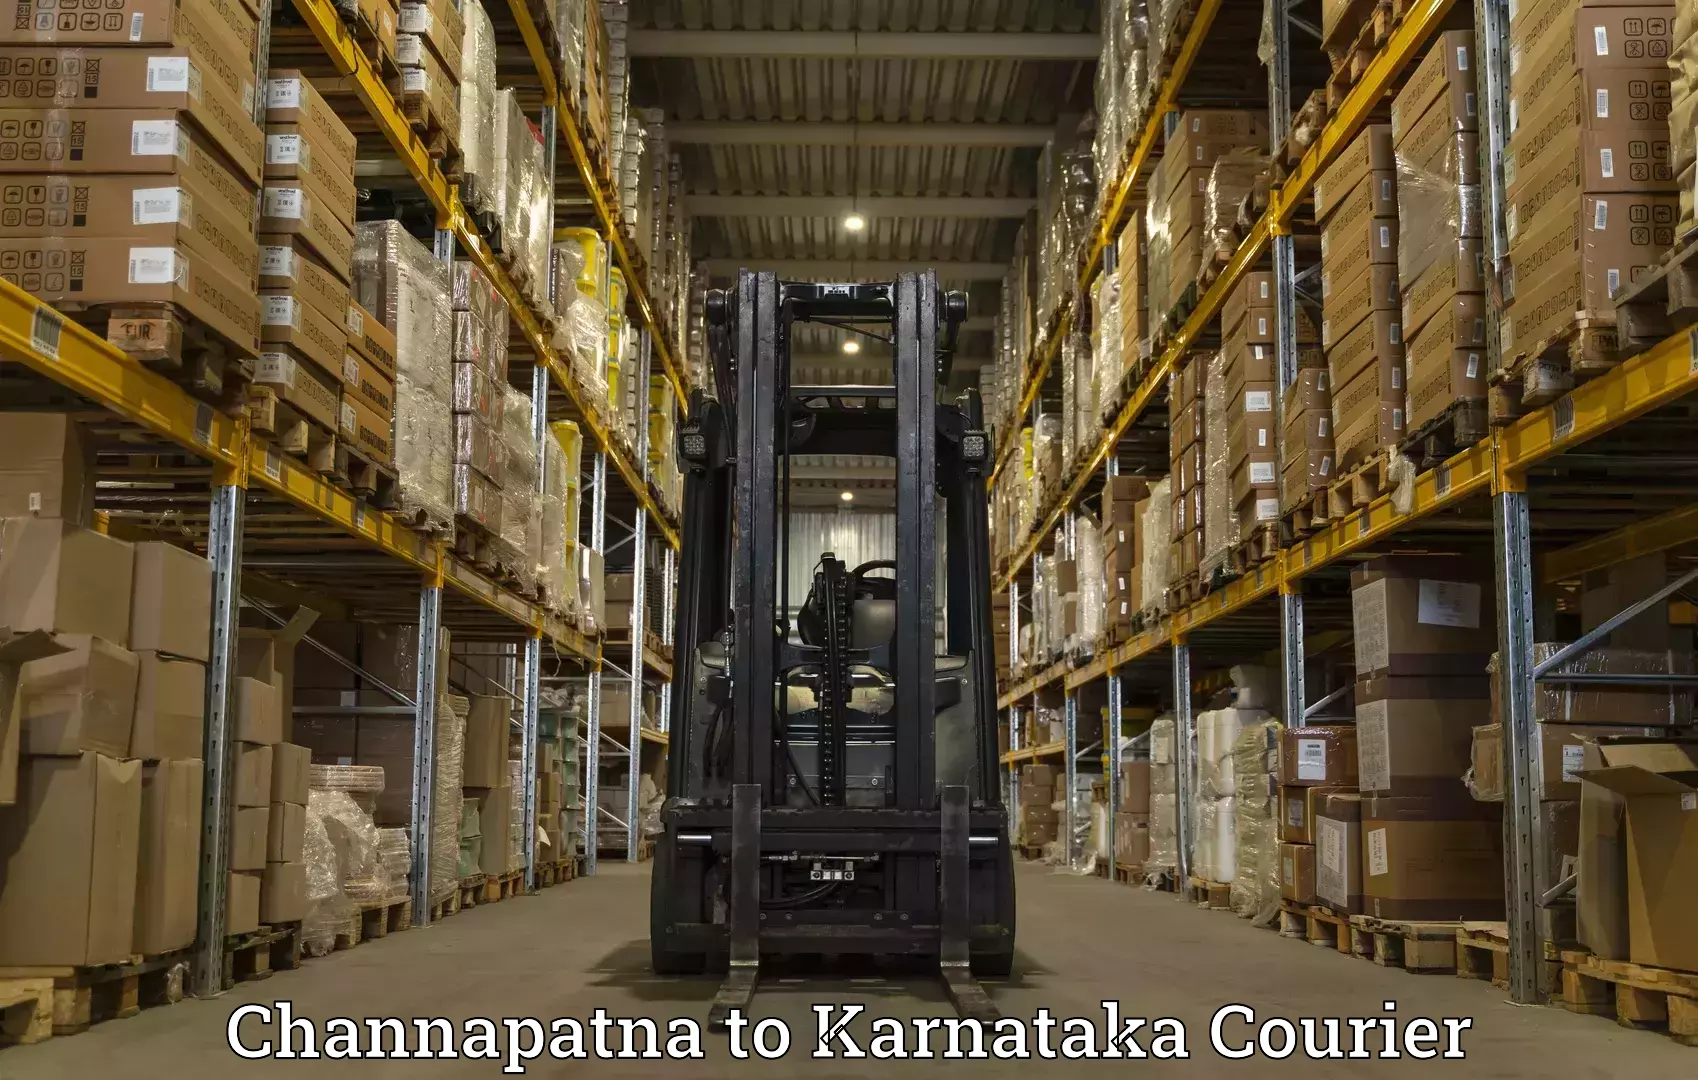 Residential courier service Channapatna to Channapatna